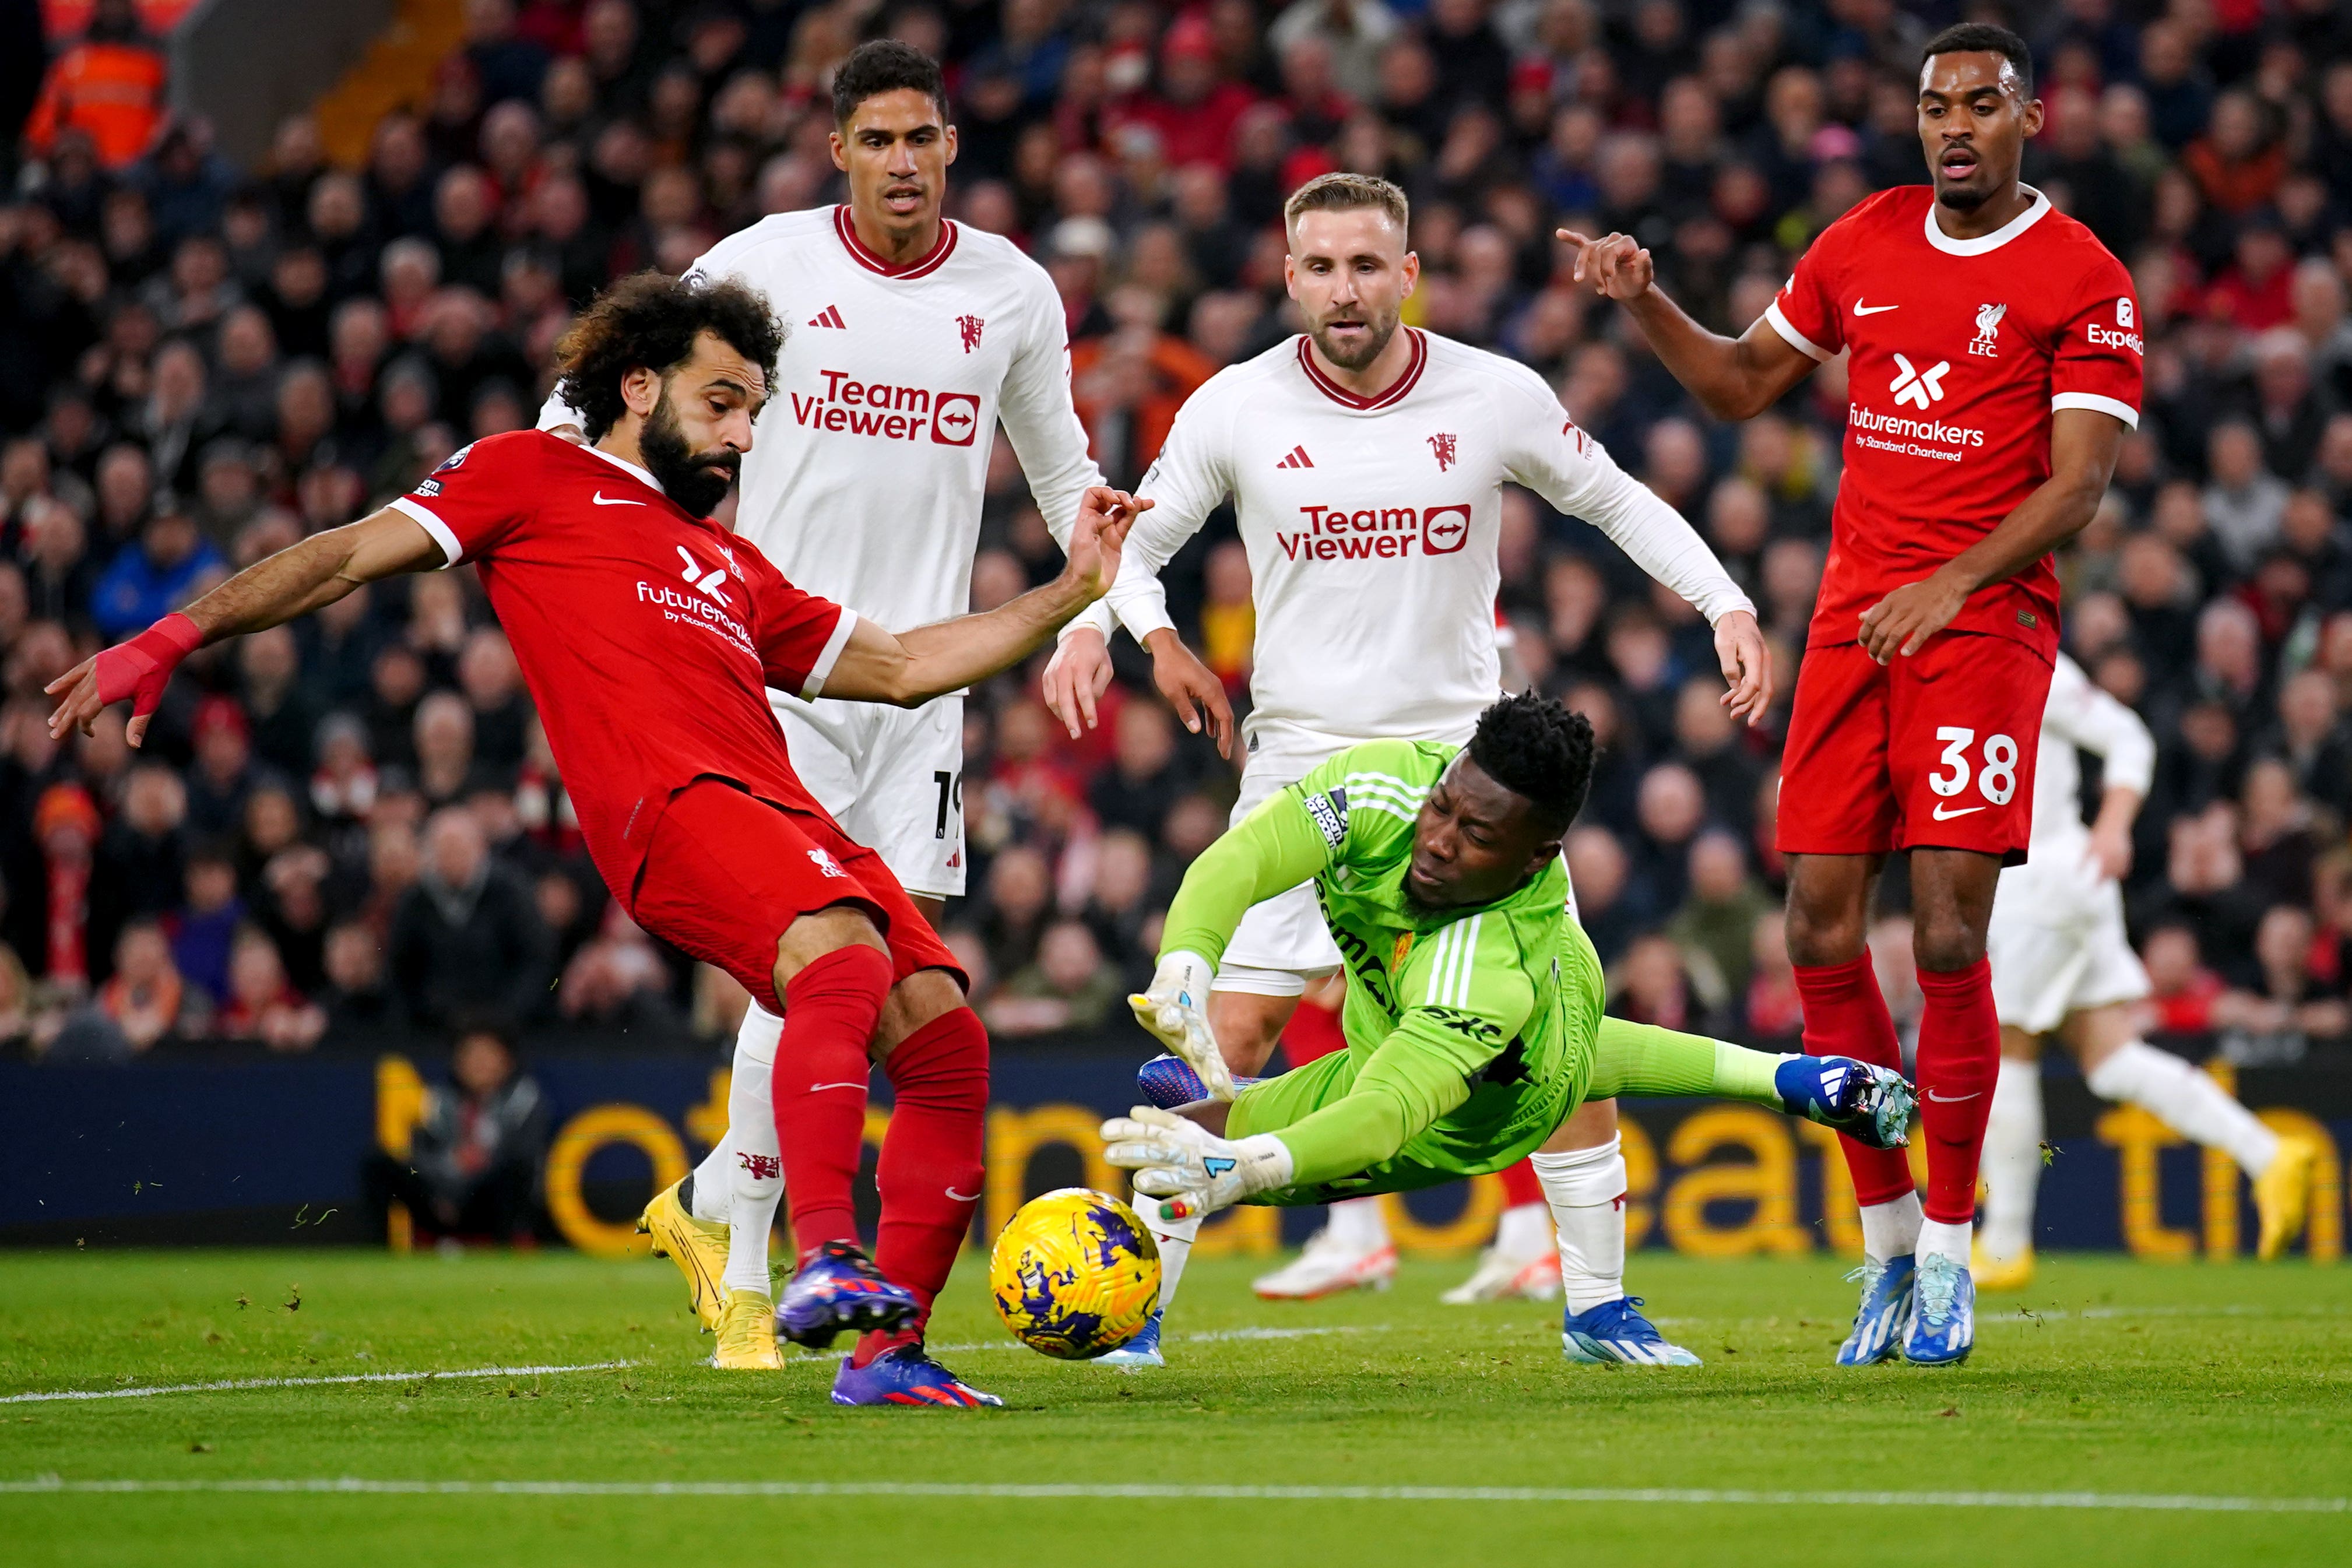 Liverpool were held to a goalless draw by Manchester United at Anfield